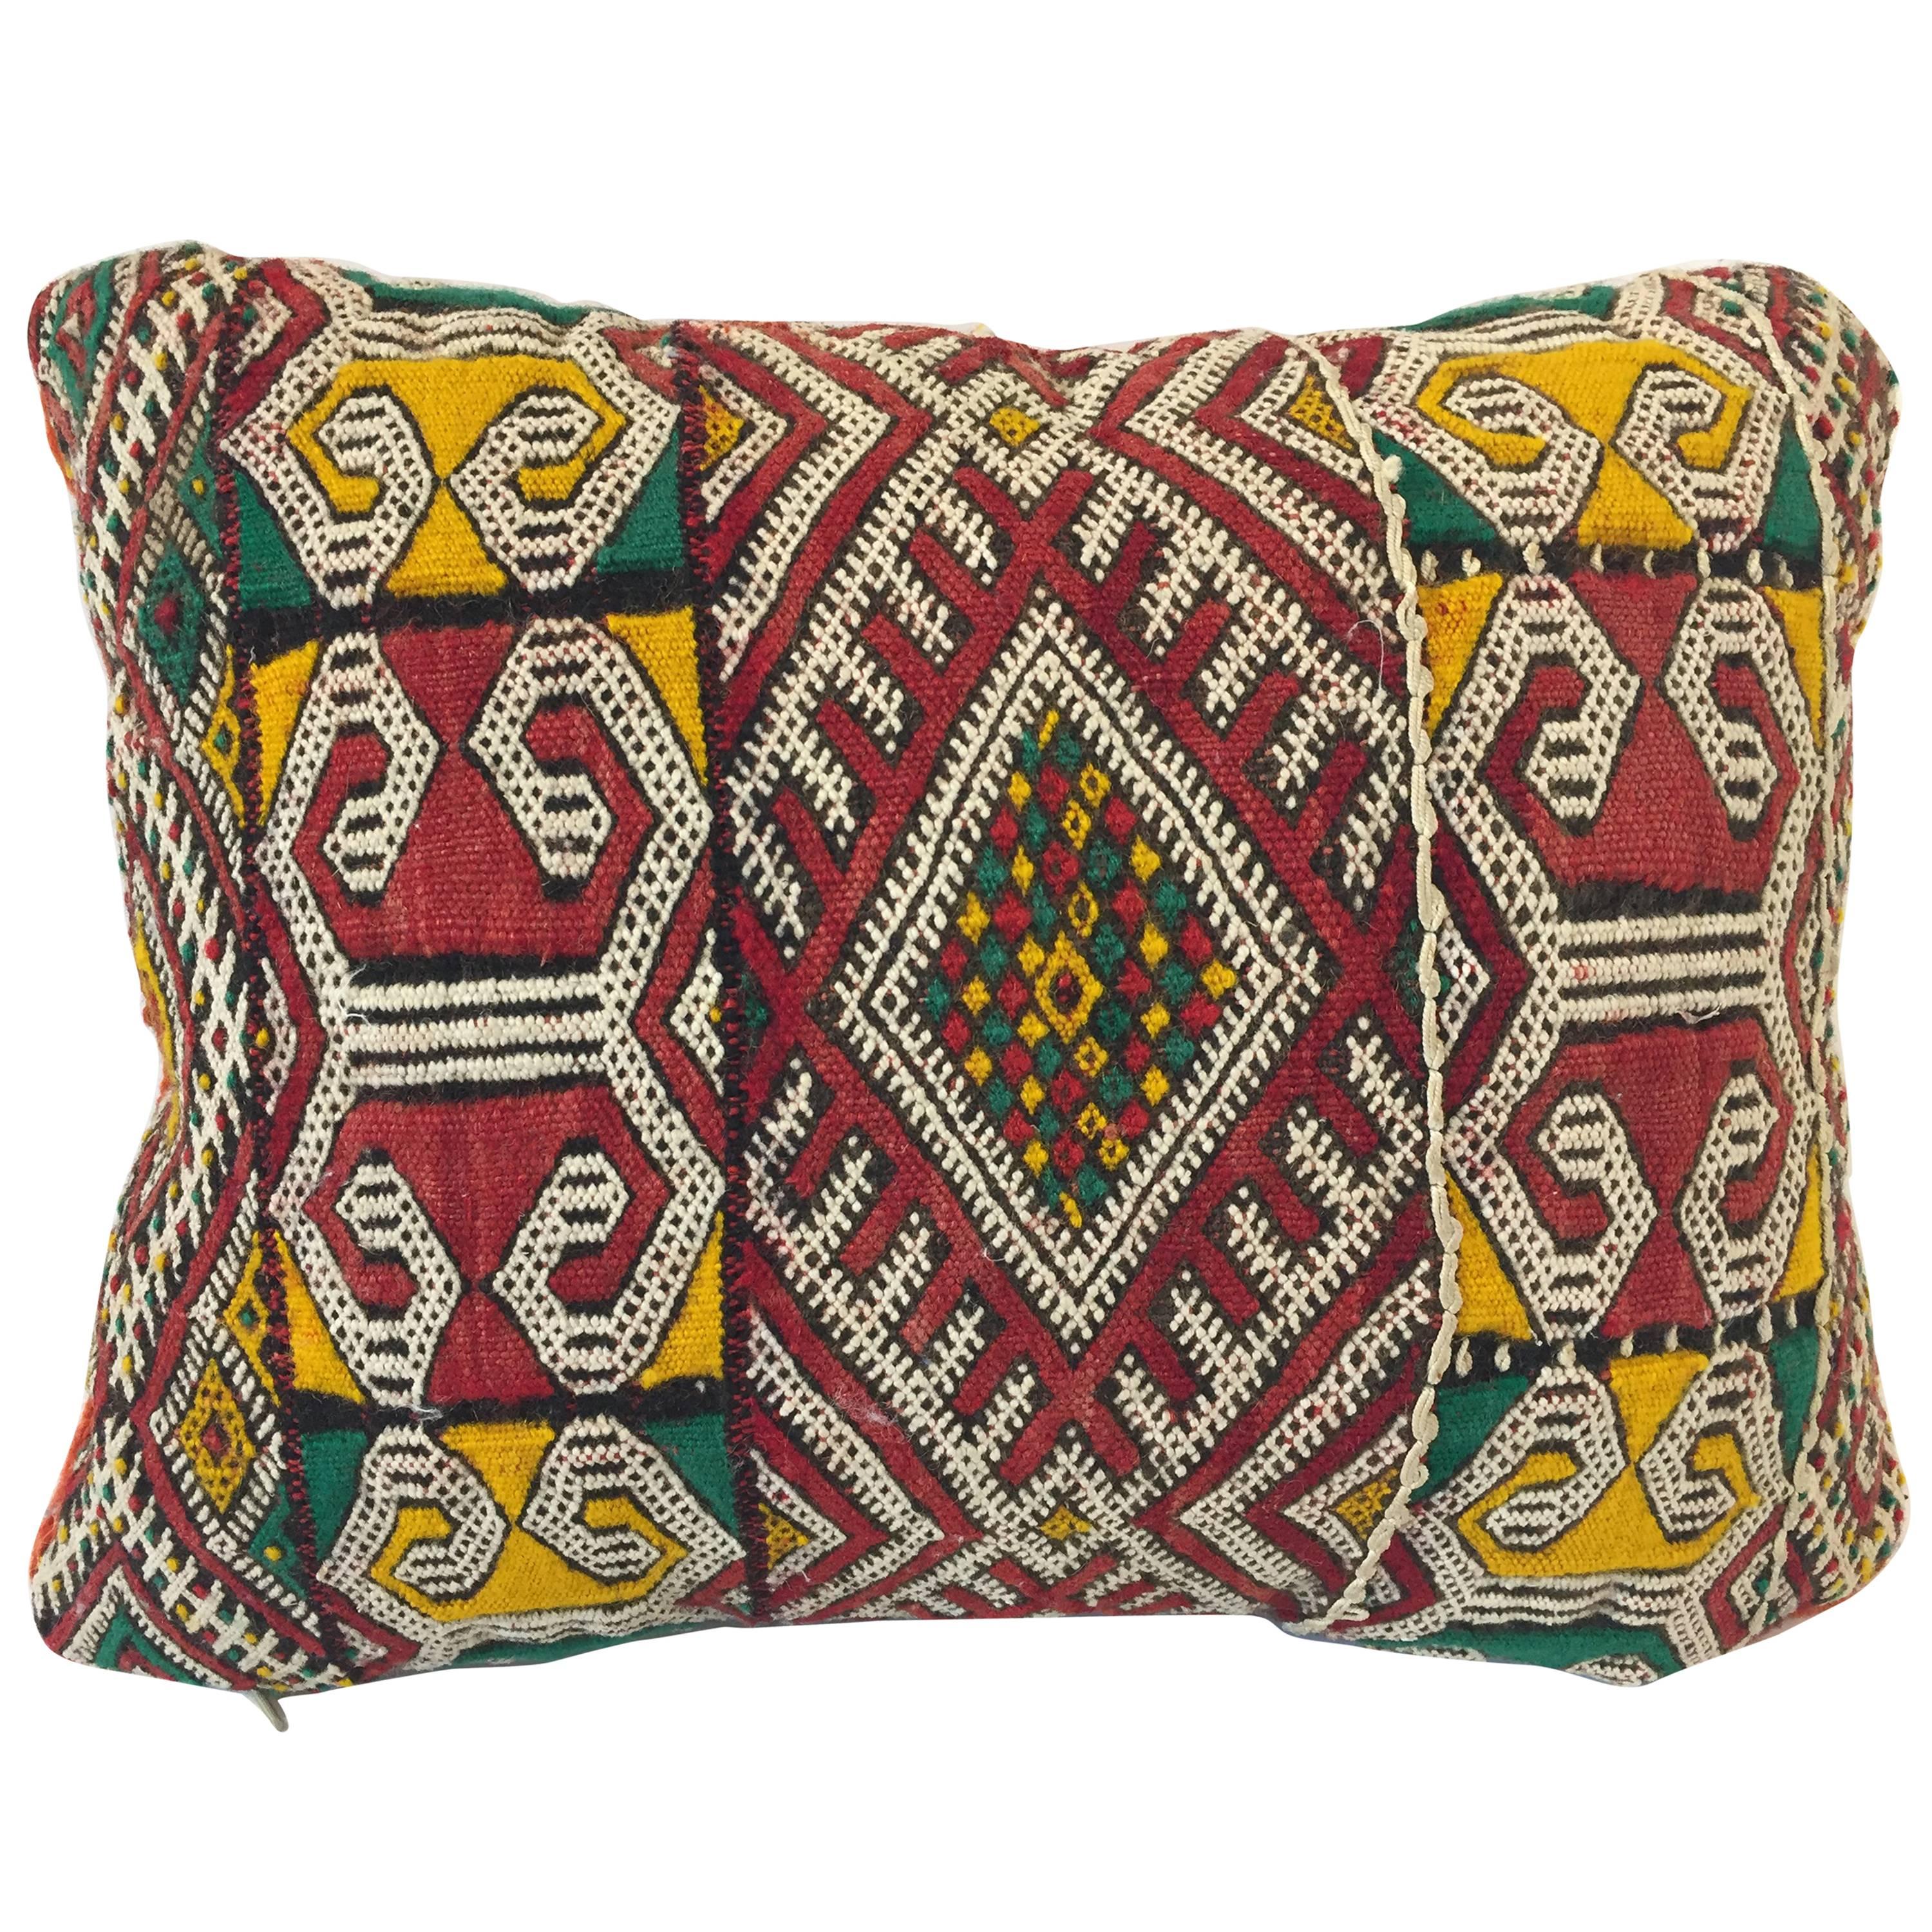 Berber Tribal Moroccan Pillow with African Designs